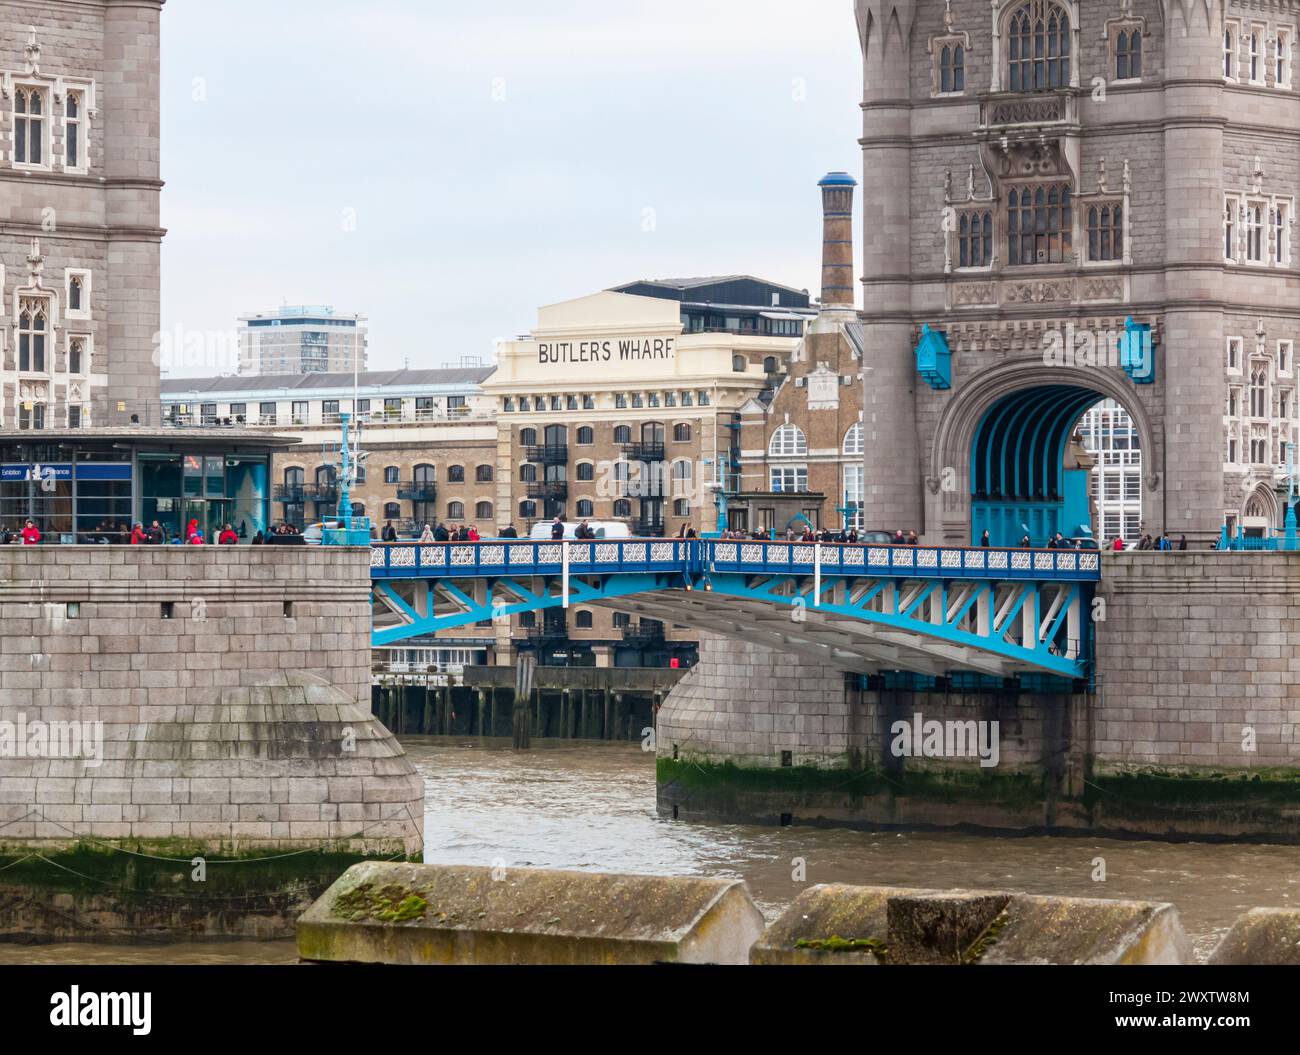 The Grade II listed Butlers Wharf building on the south bank of the River Thames seen through the towers of iconic London Bridge, London, UK Stock Photo